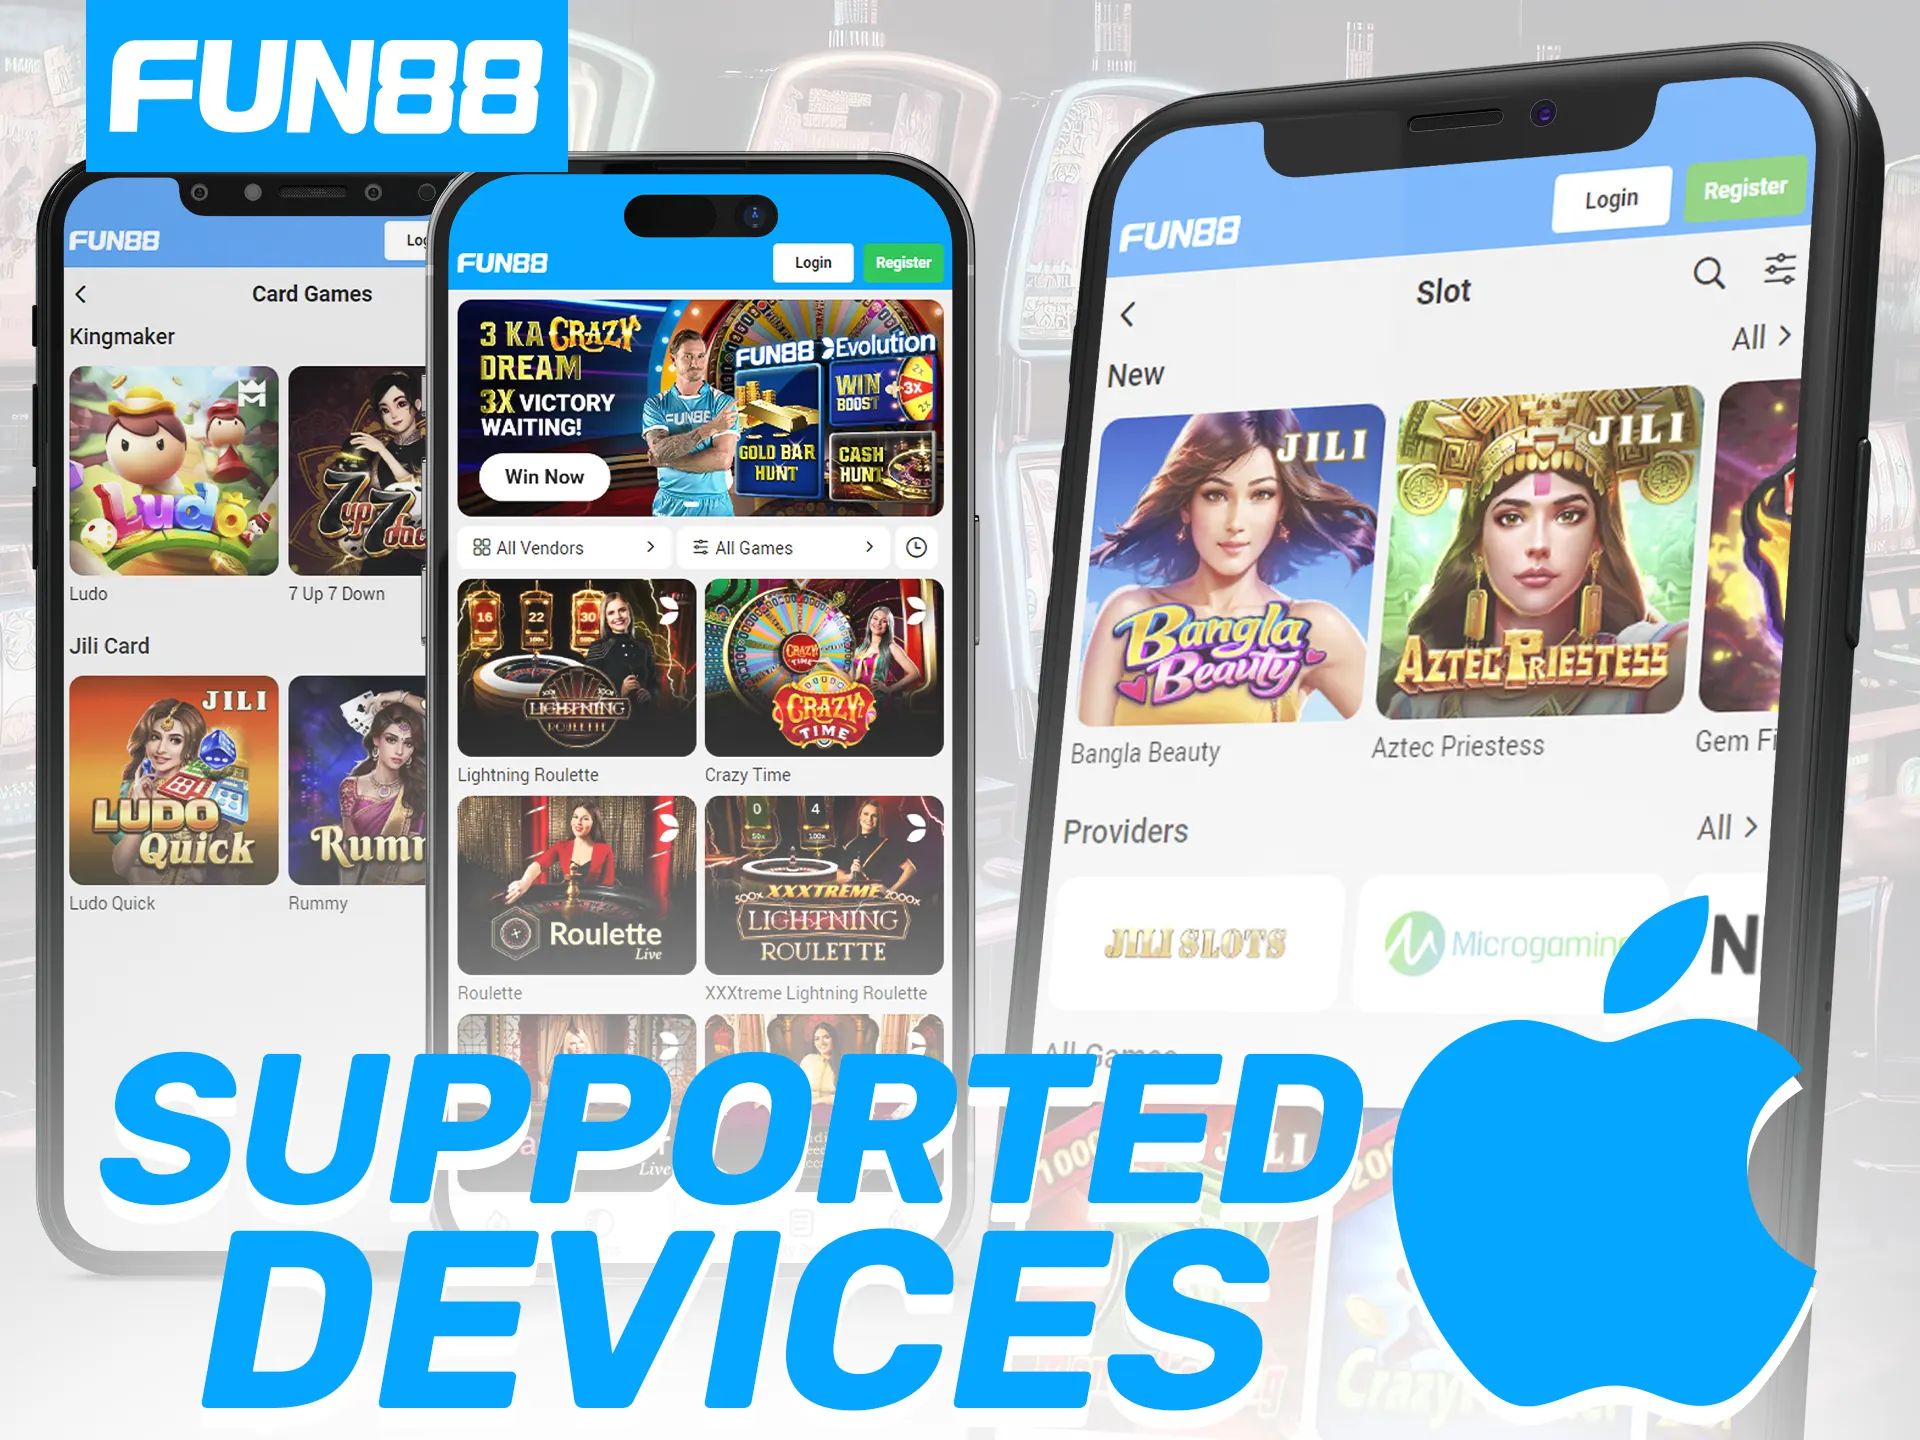 The Fun88 app is supporting most of the Apple mobile devices.